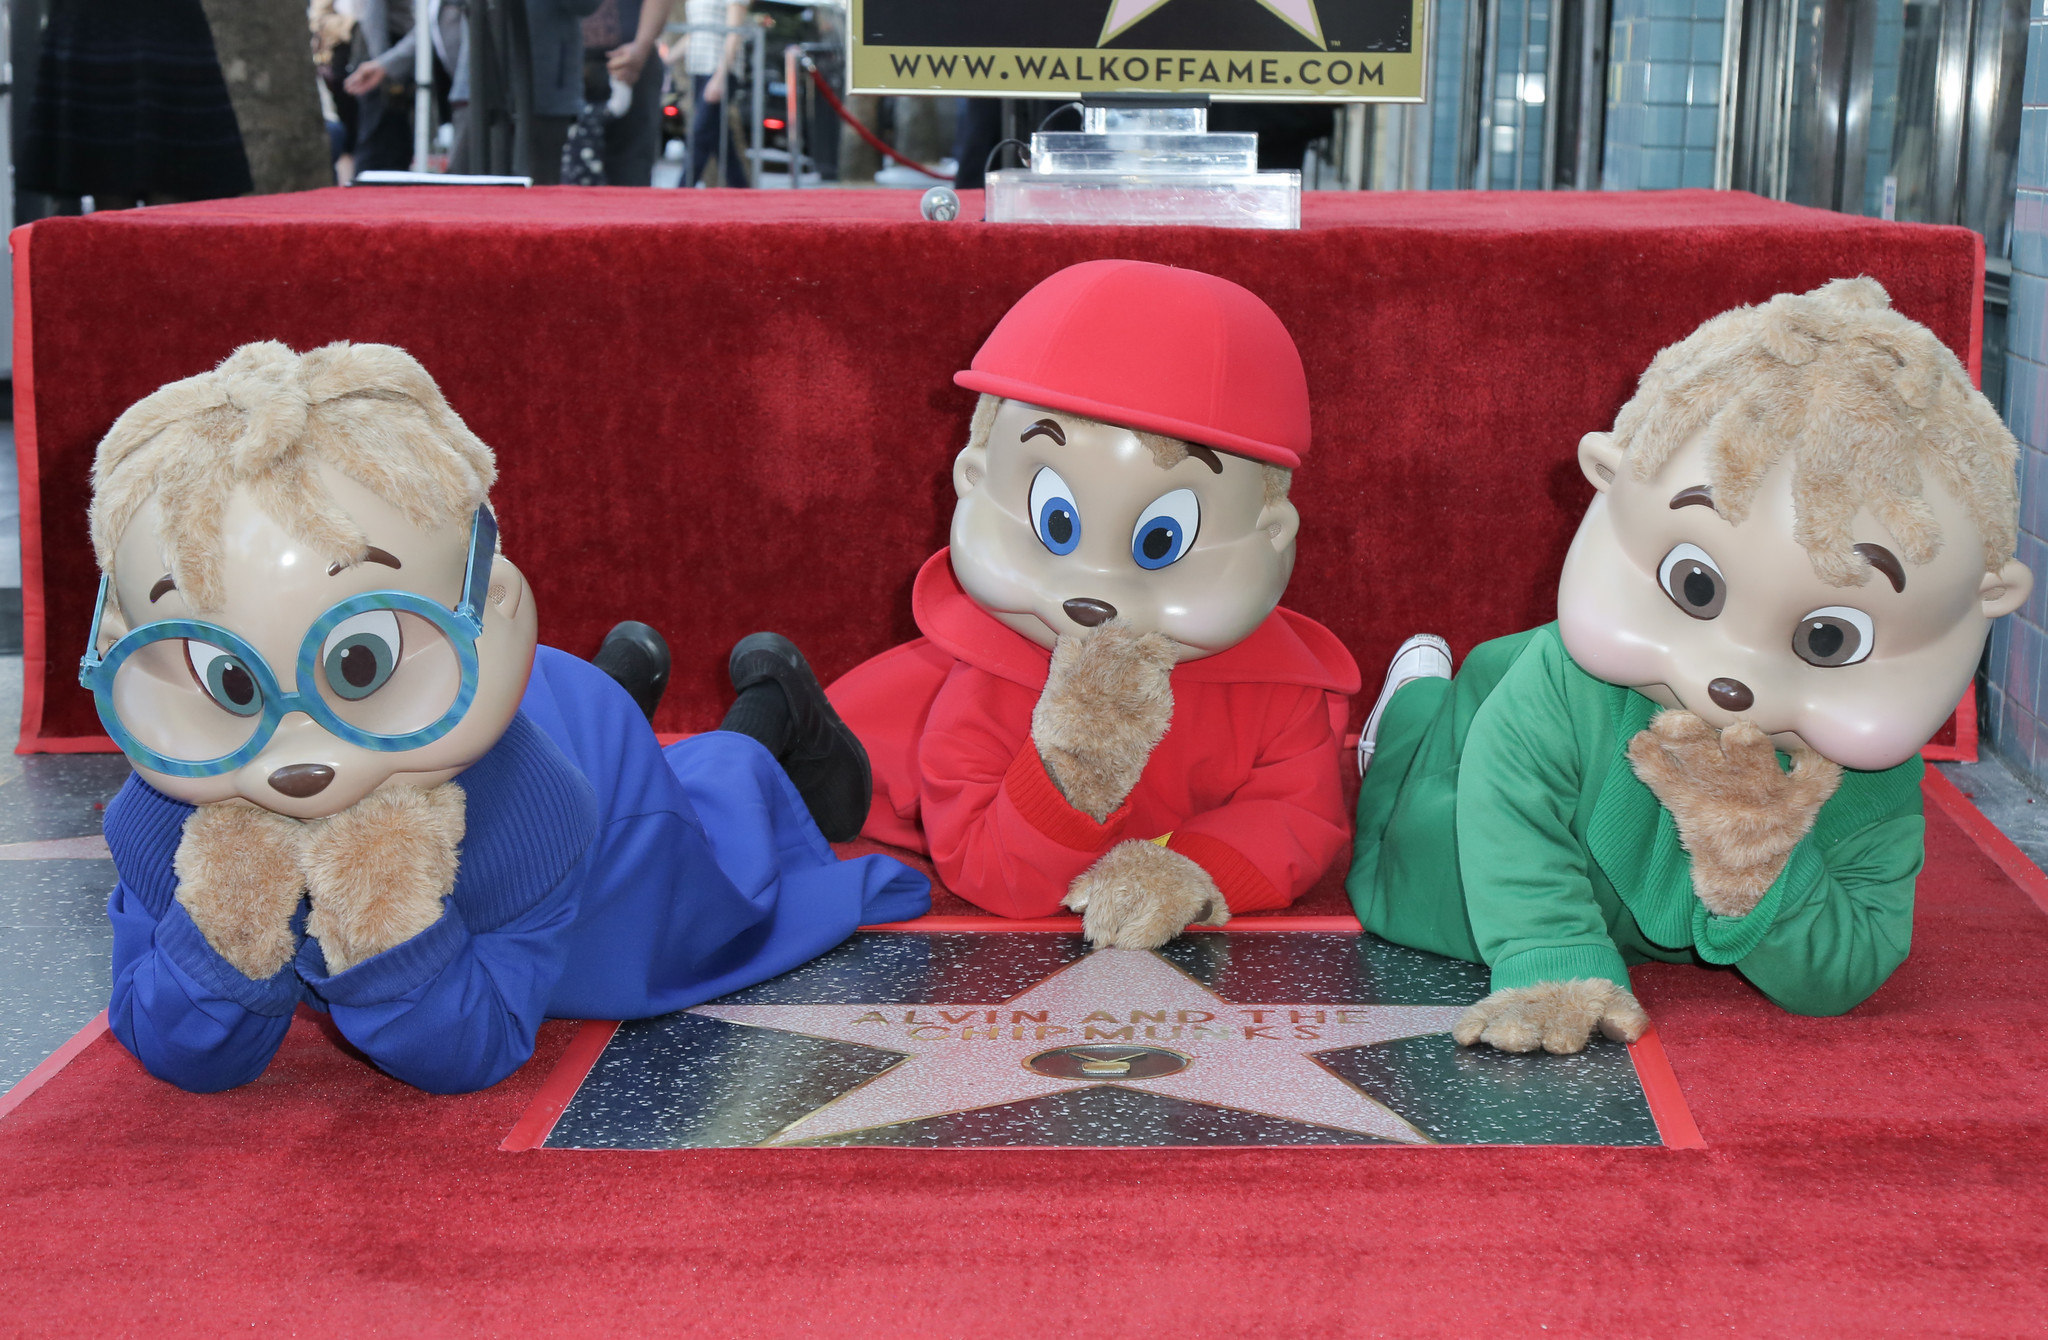 Alvin and the Chipmunks are honored with a star on the Hollywood Walk of Fame in Los Angeles on Mar. 14, 2019.